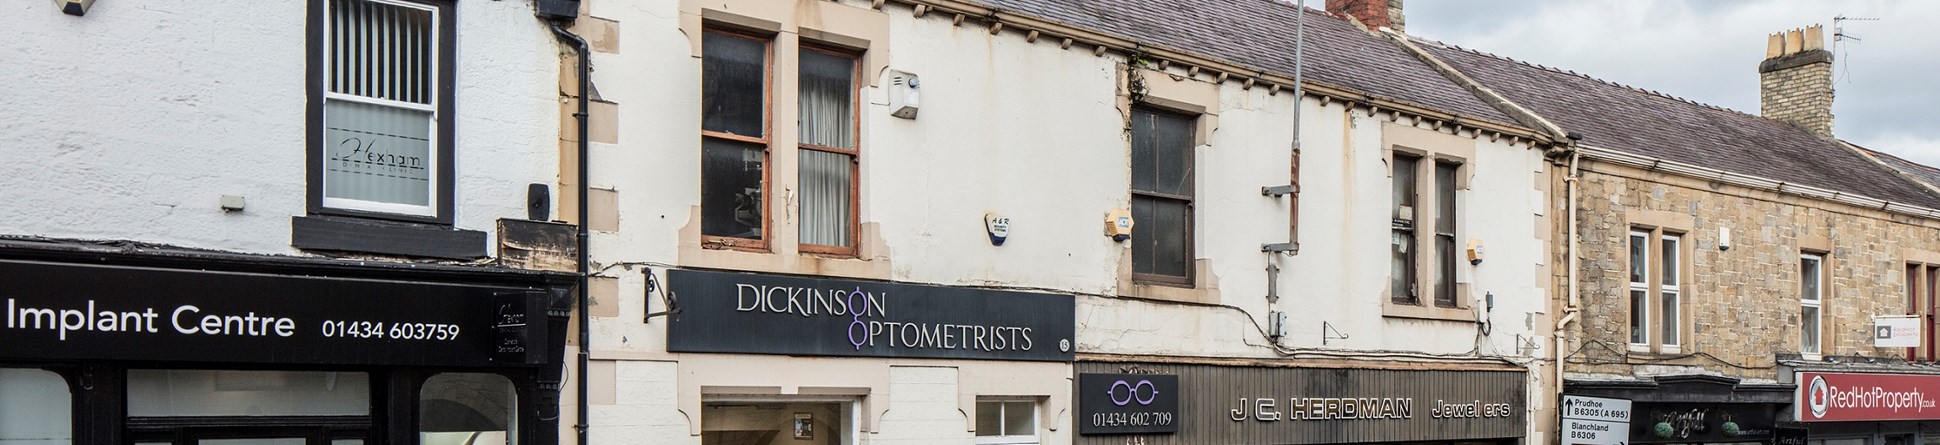 Hexham High Street Heritage Action Zone. 2019.Dickinson Optometrists and J.C.Herdman Jewellers,15 Battle Hill/ Priestpopple, Hexham, Northumberland. View from south east.